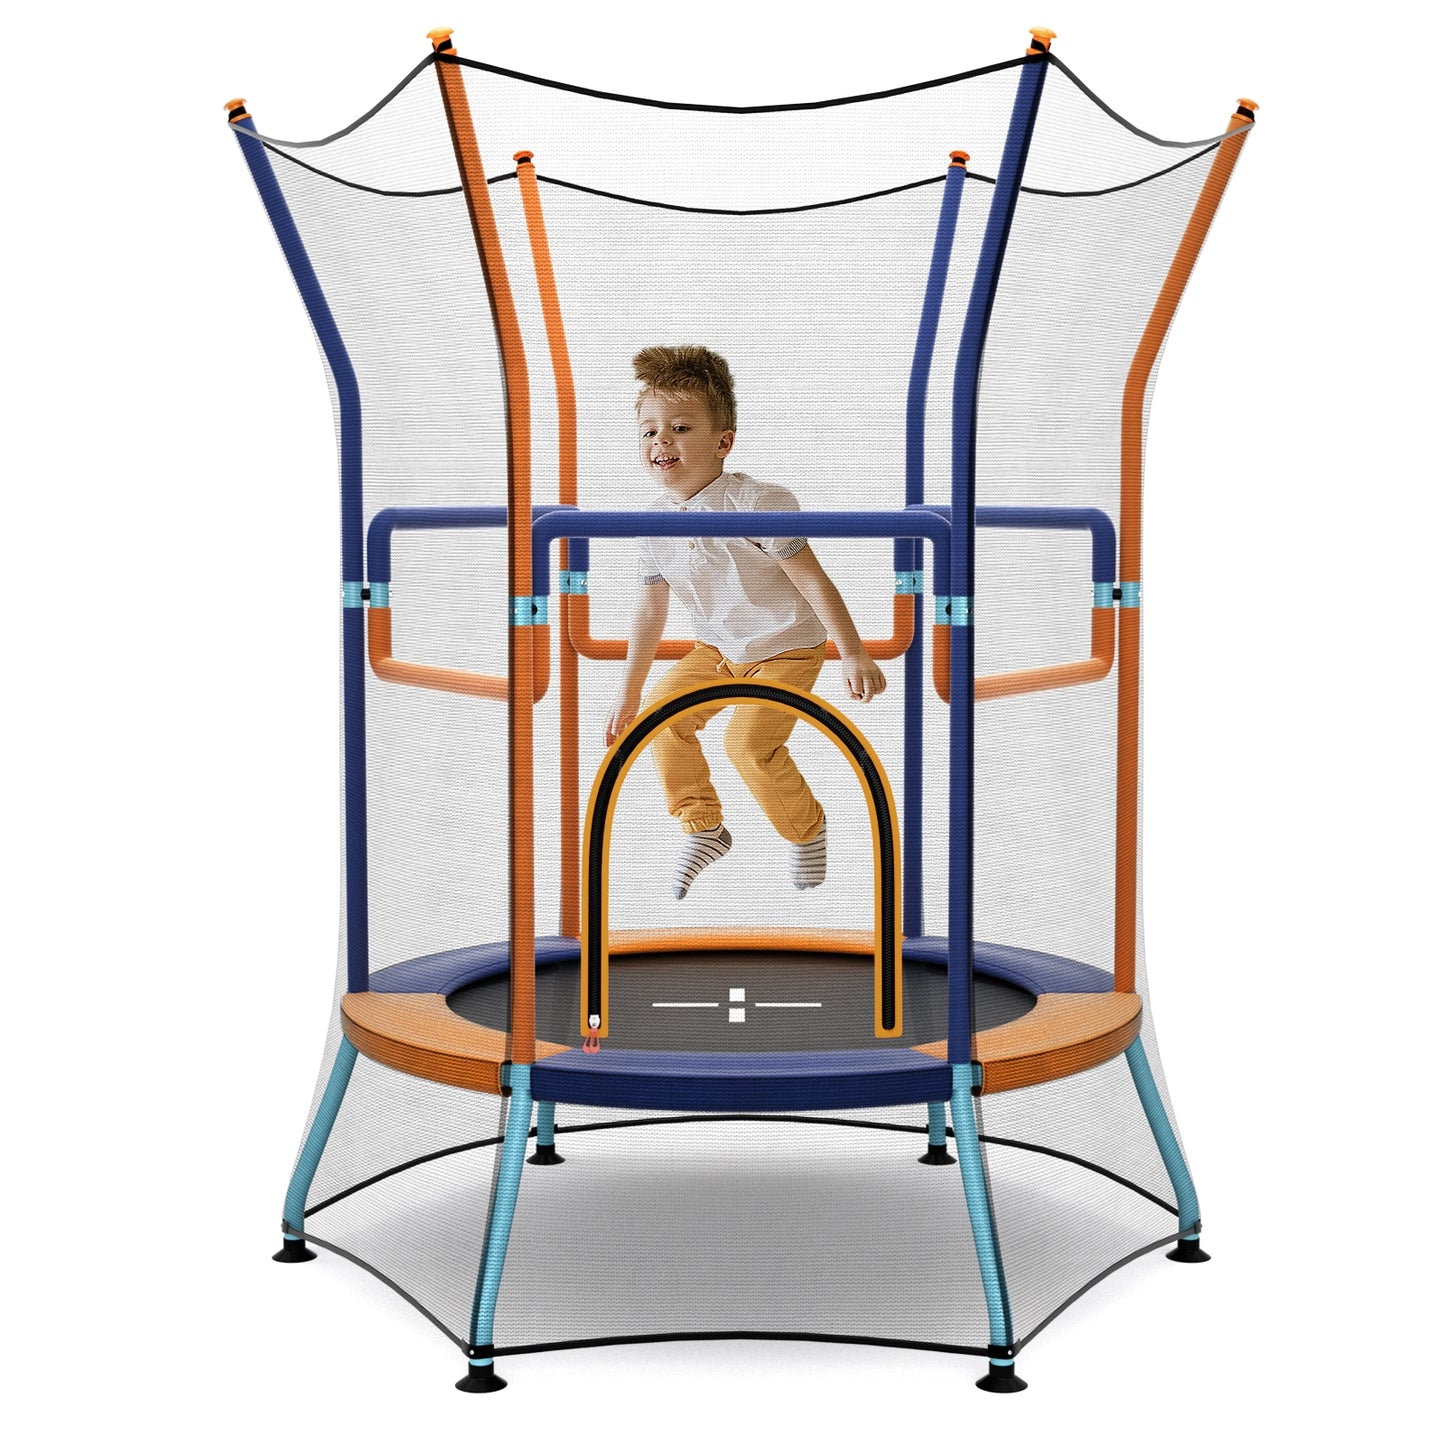 Mini Trampoline for Kids with Safety Enclosure Net and Foam Handles-Orange